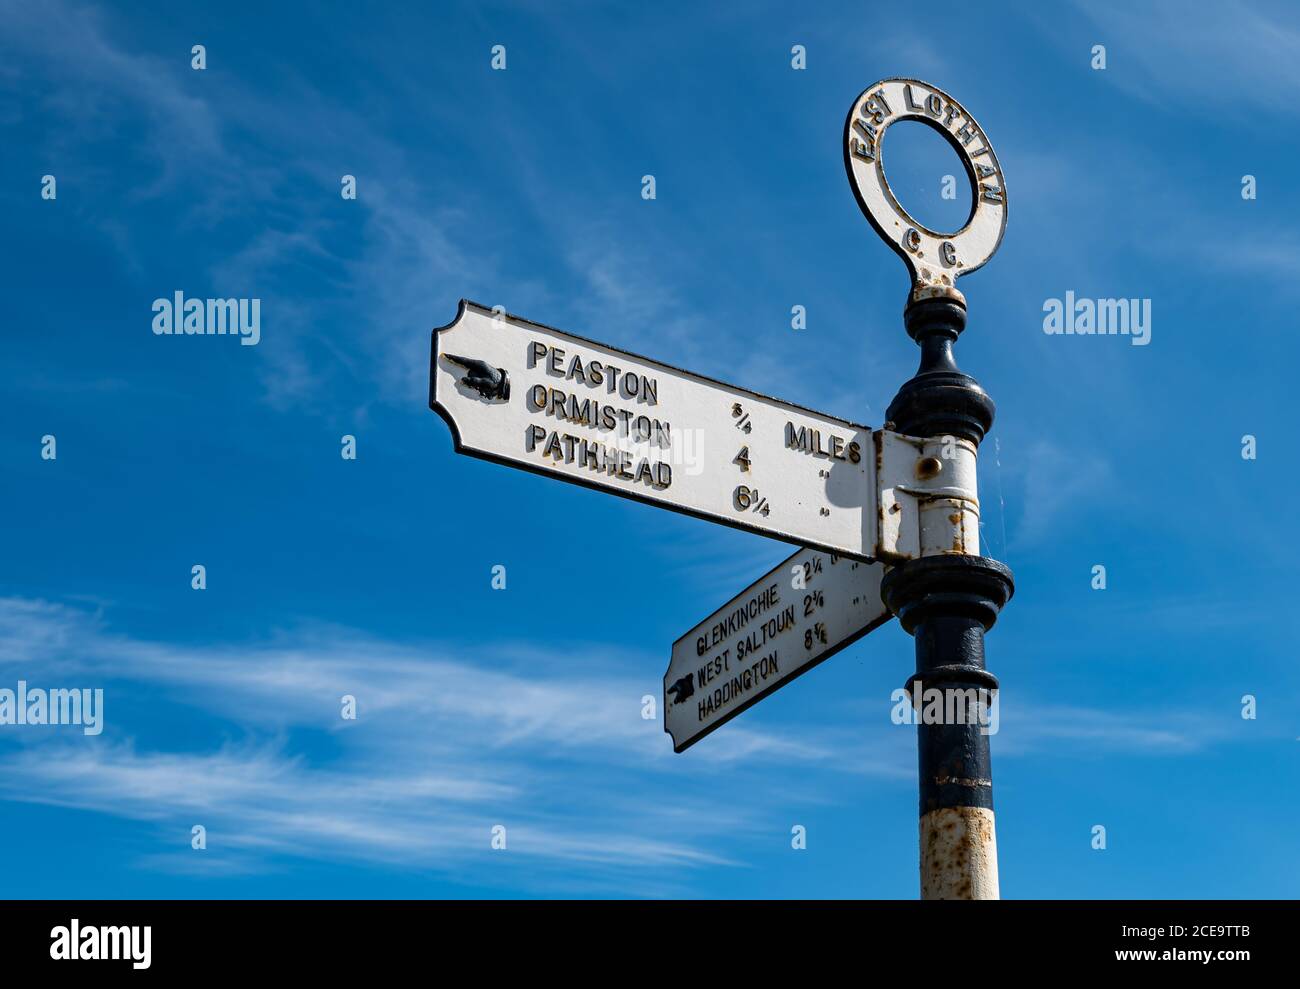 Old fashioned signpost with hand pointing io villages with distances in miles, East Lothian, Scotland, UK Stock Photo